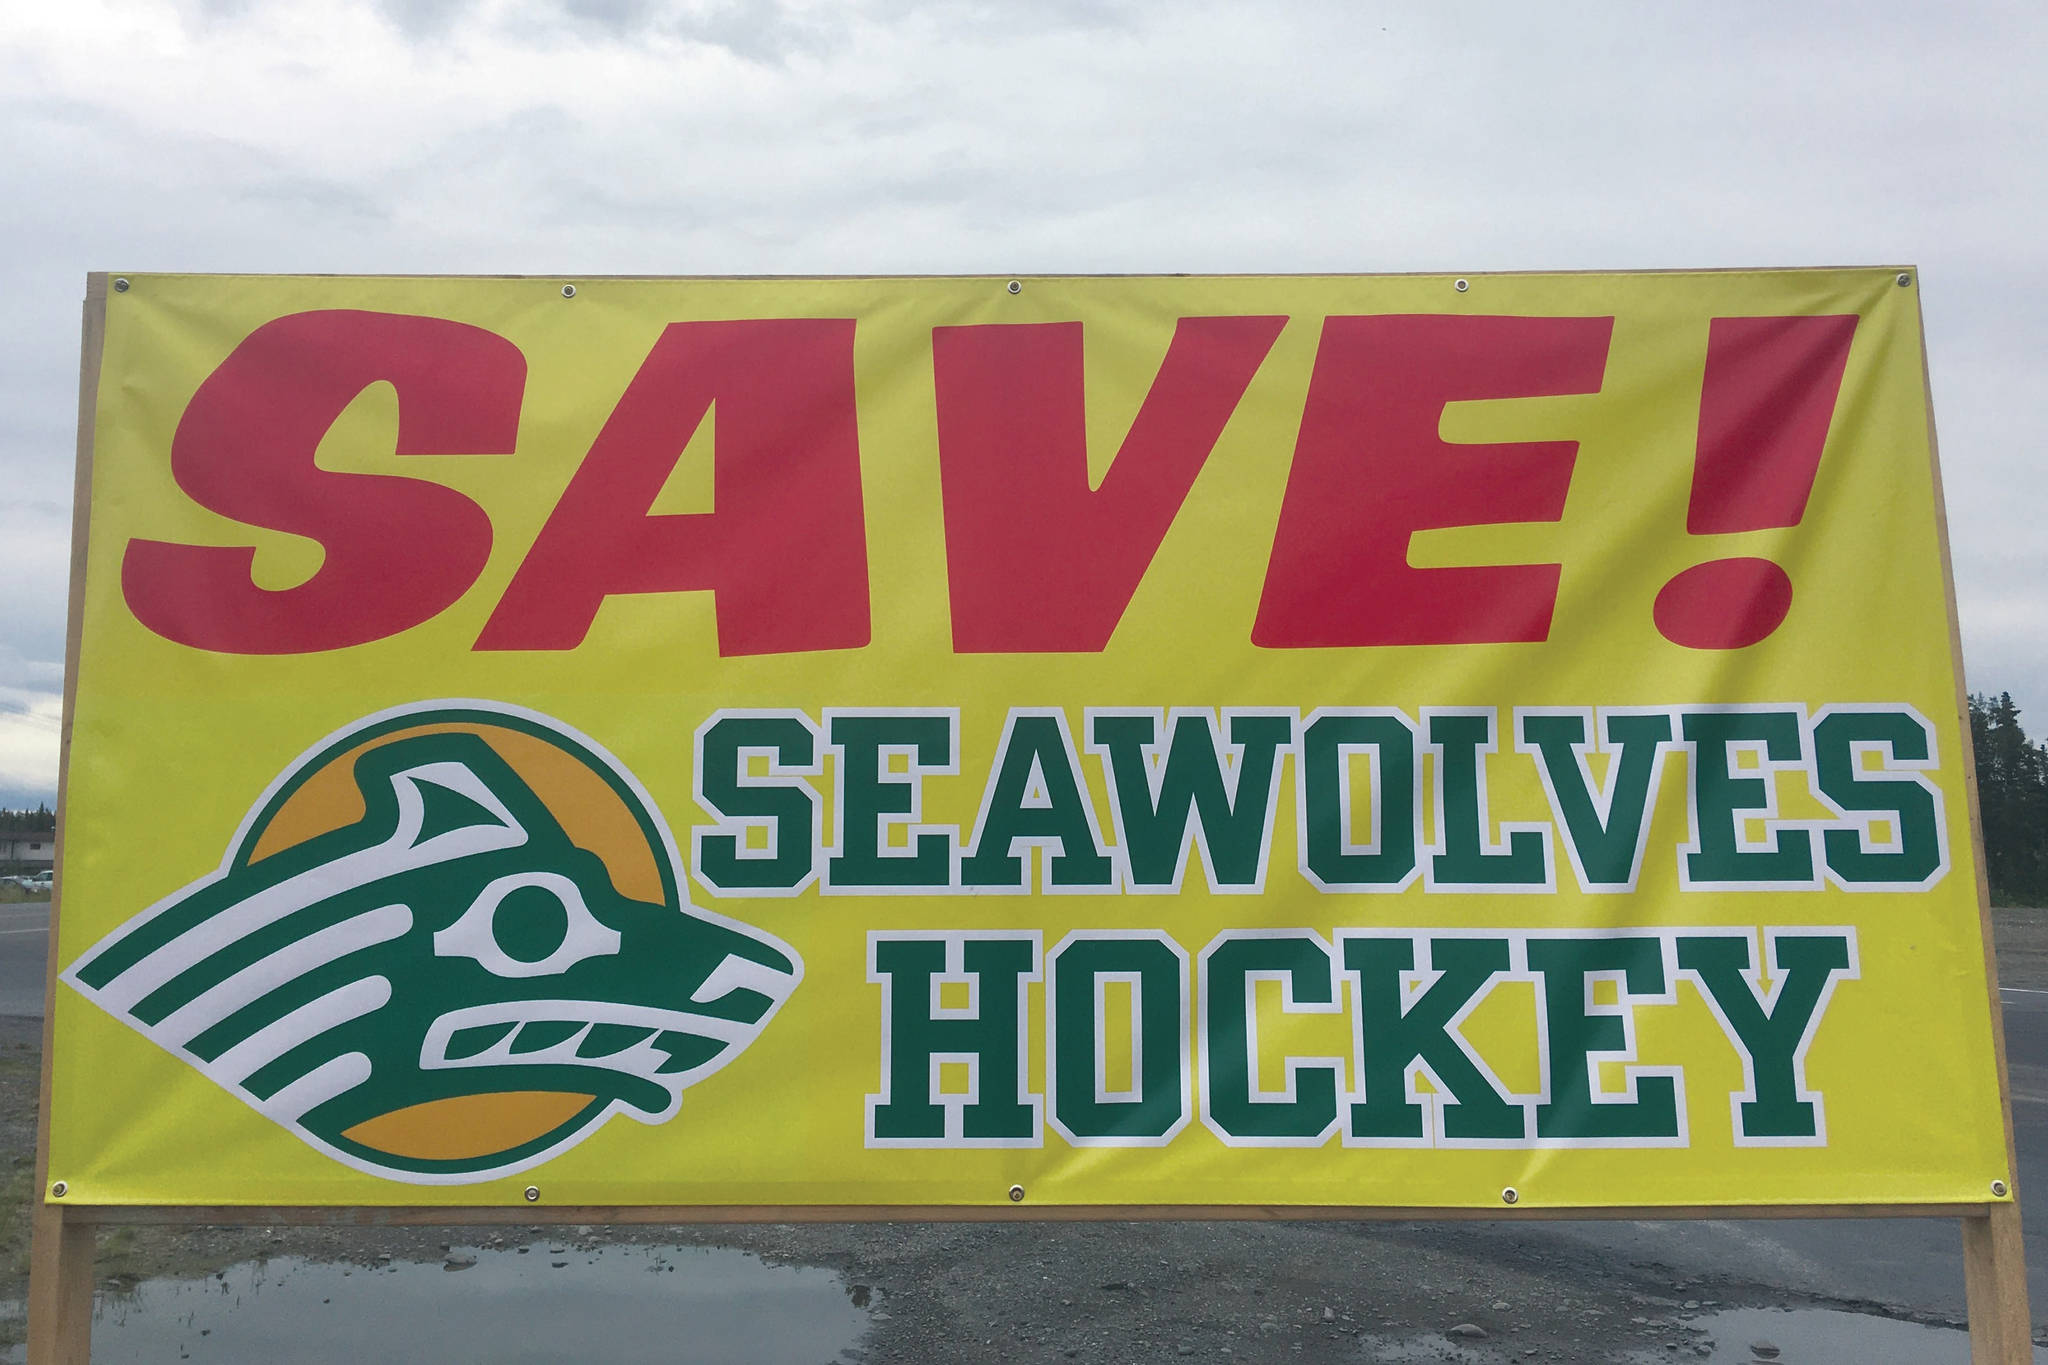 Rally aims to save Seawolves